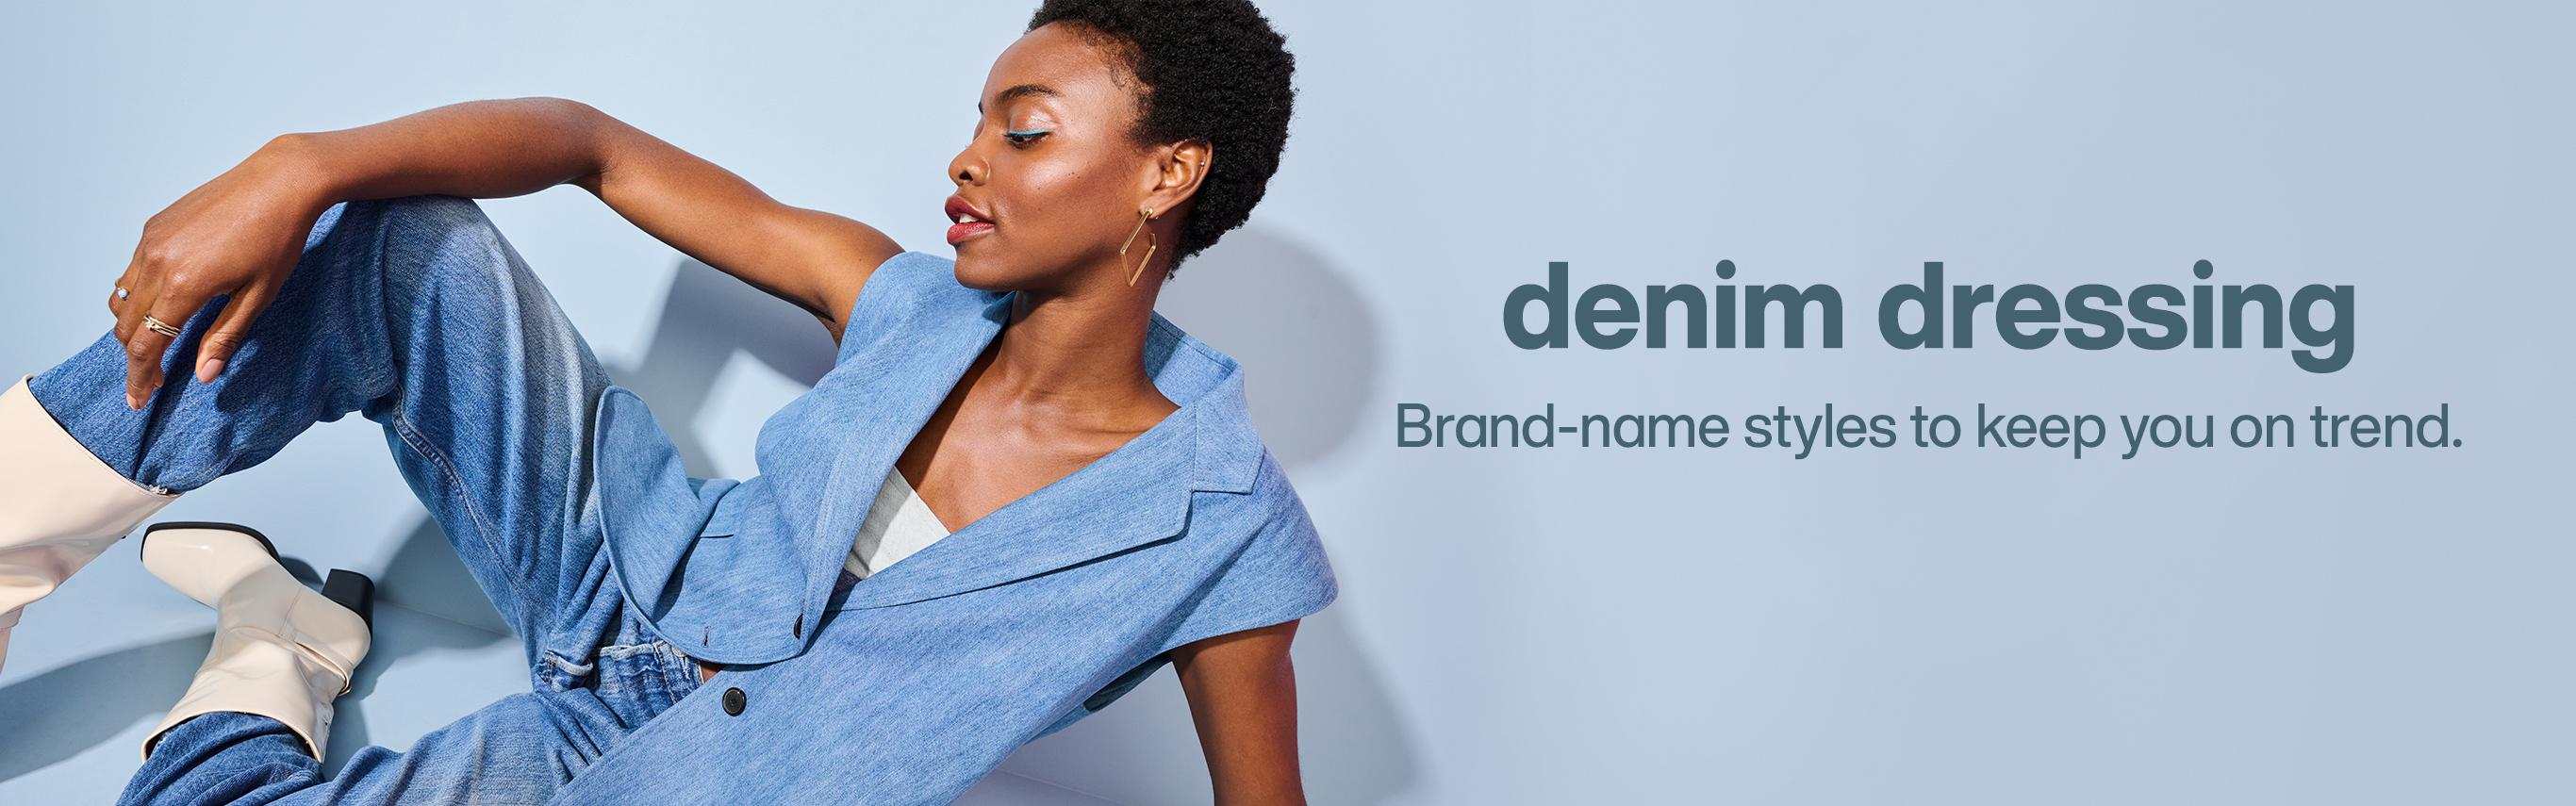 Denim dressing. Brand name style to keep you on trend. Shop Now.